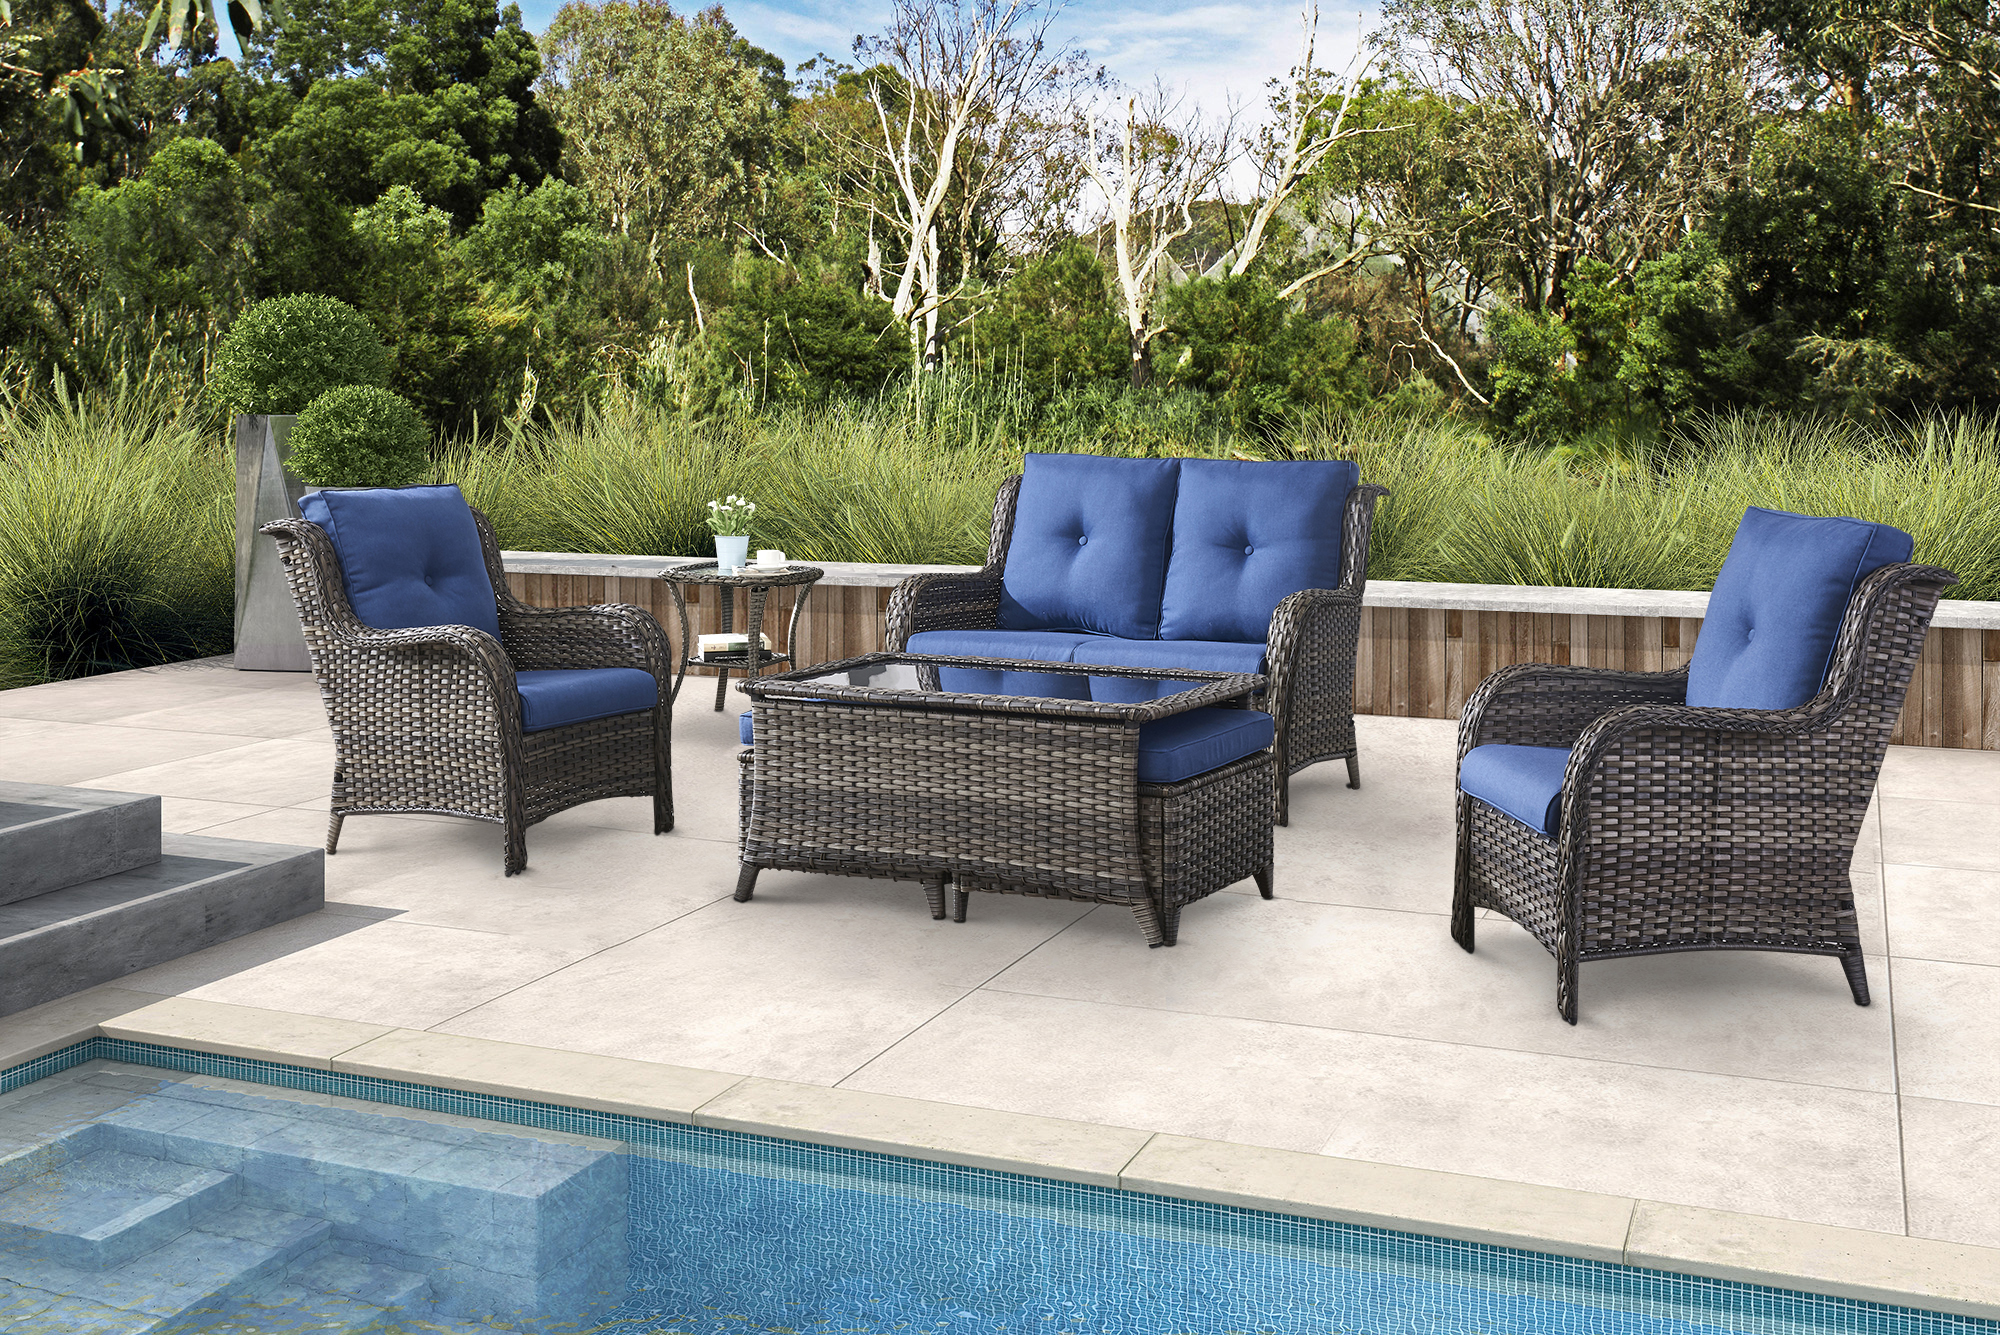 PARKWELL 7Pcs Outdoor Wicker Rattan Conversation Patio Furniture Set, including Two-seater Sofa, Chairs, Coffee Table, Ottomans and Side Table with Cushion, Blue - image 1 of 9